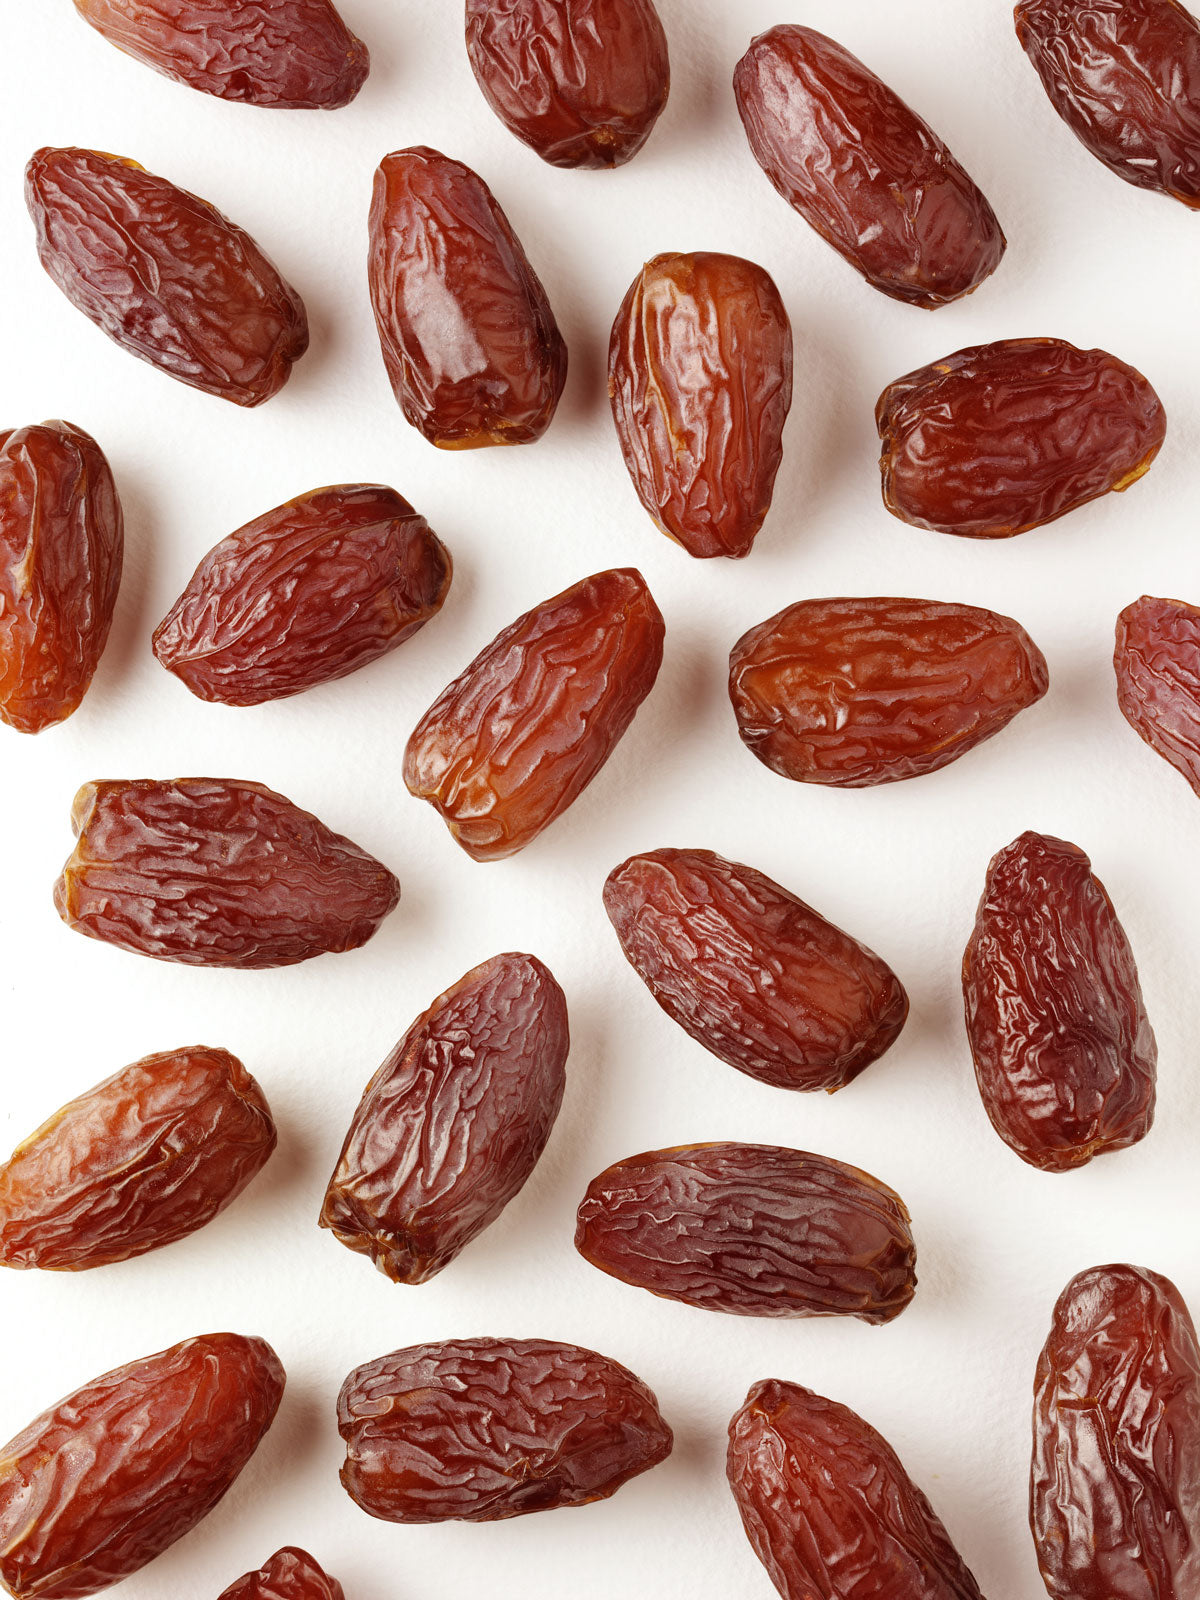 Medjool dates laid out on white background.